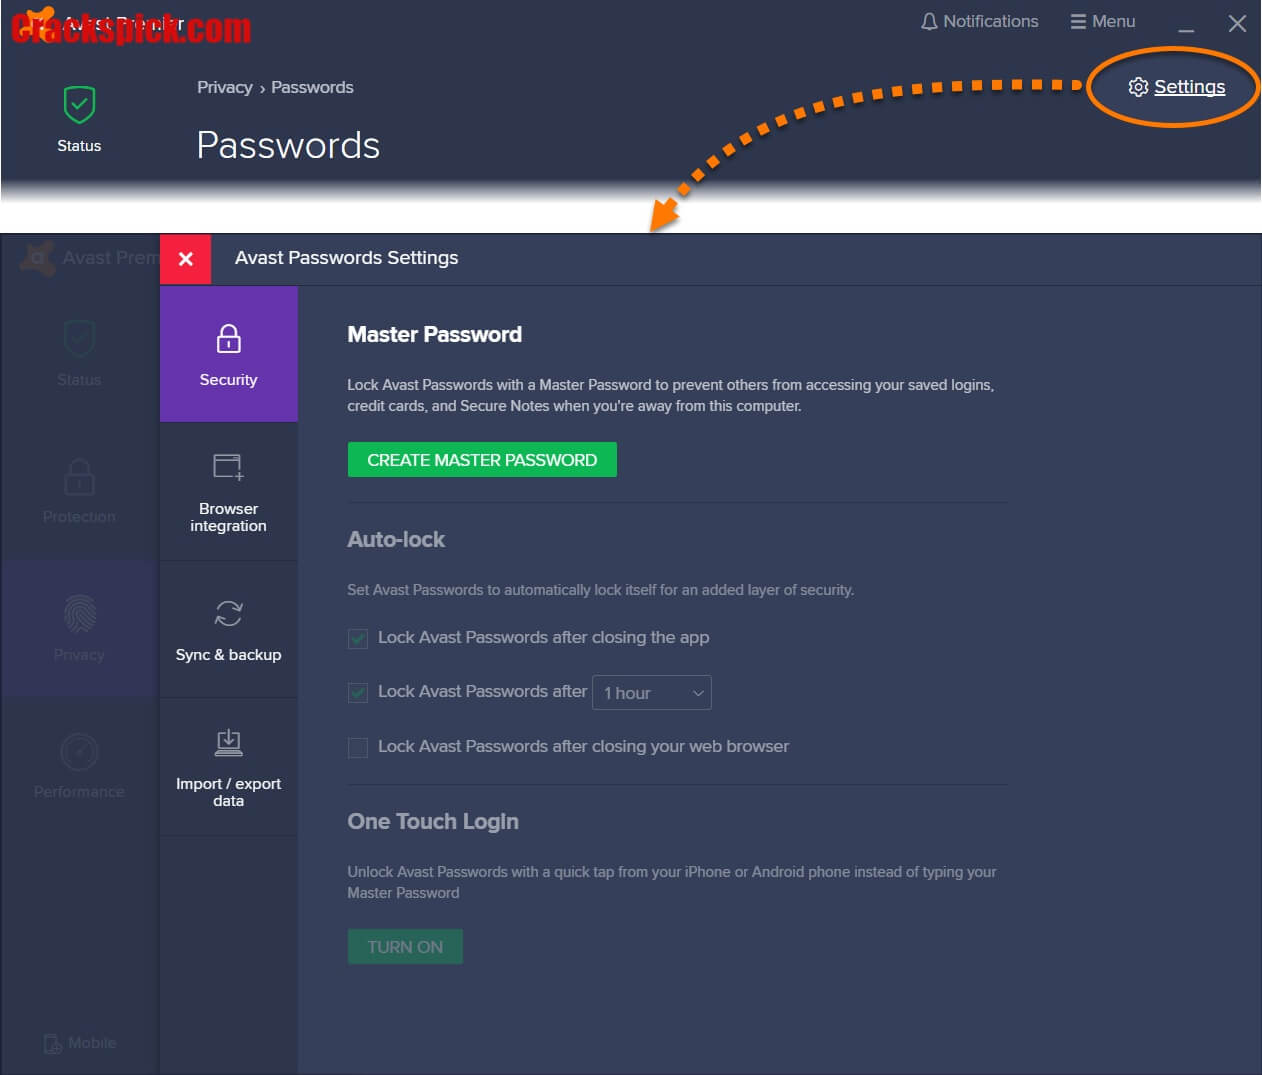 avast 12.5 free download for mac